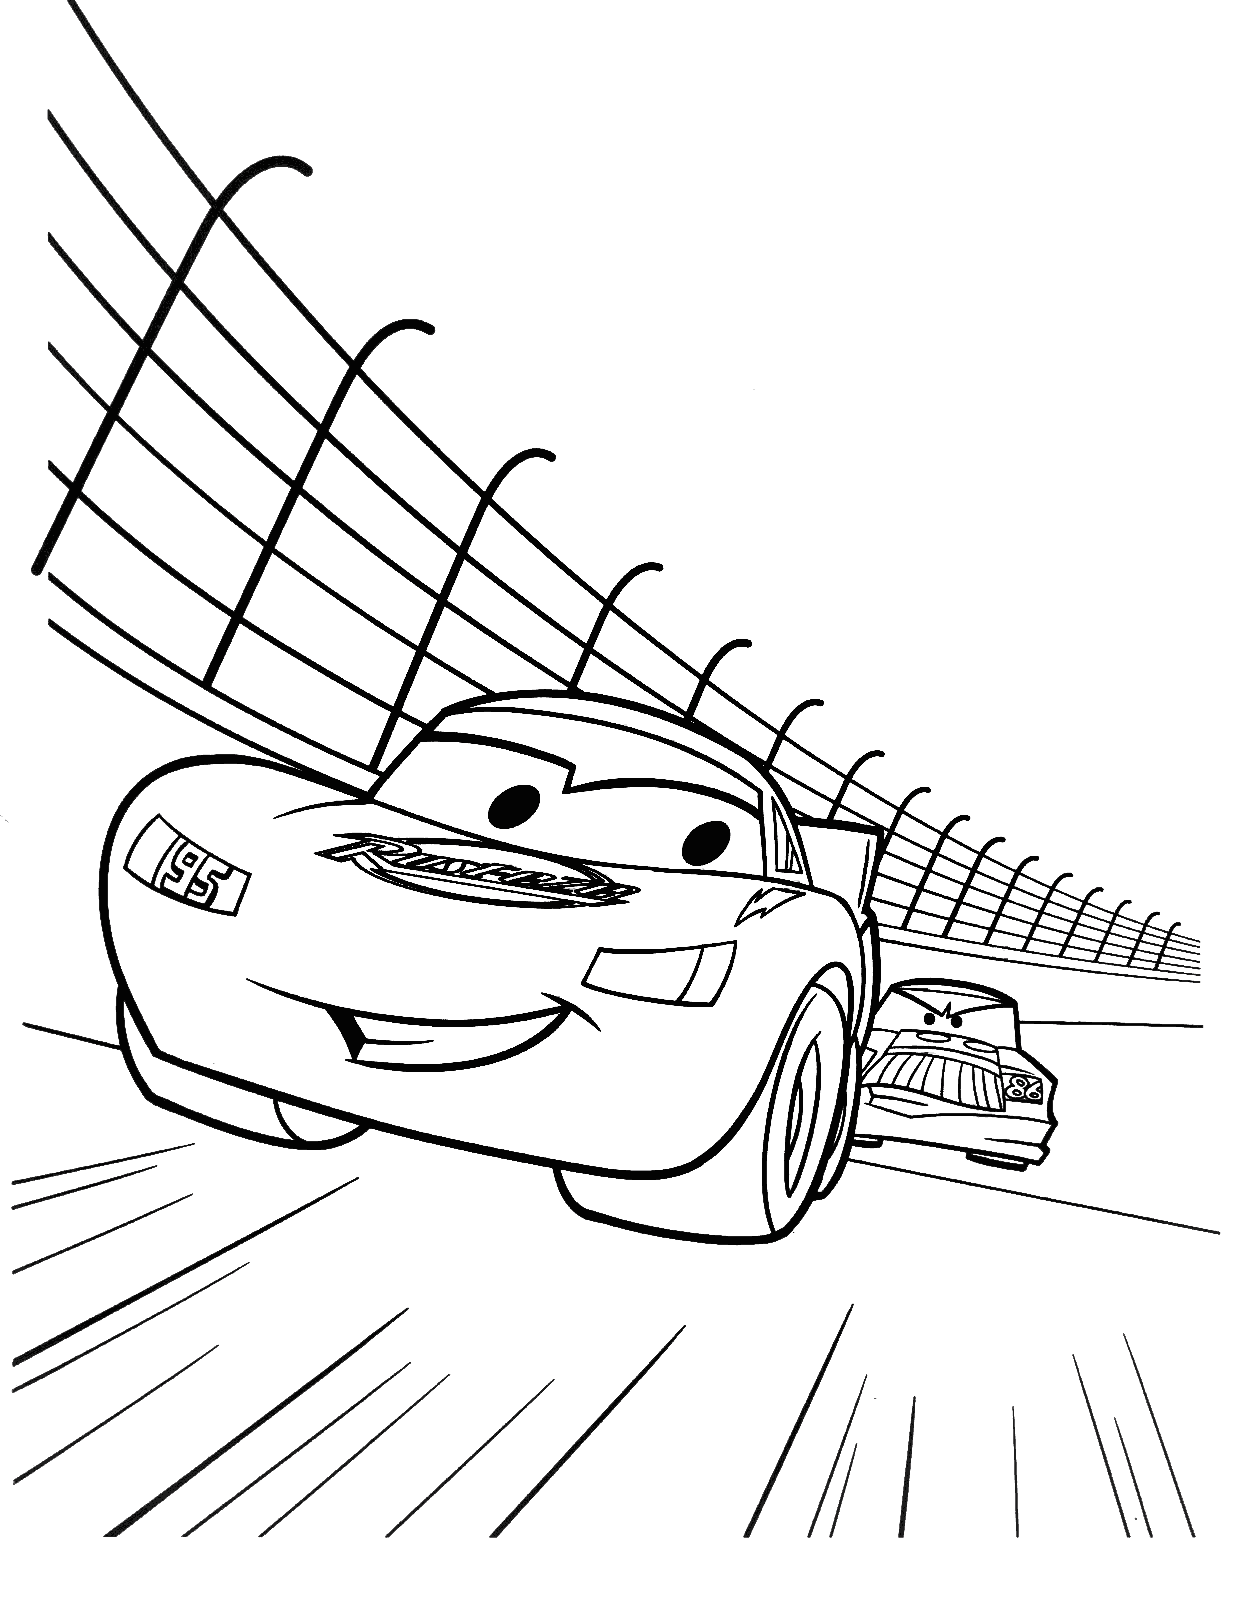 cars 3 coloring pages jackson storm from cars 3 coloring page free printable 3 cars pages coloring 